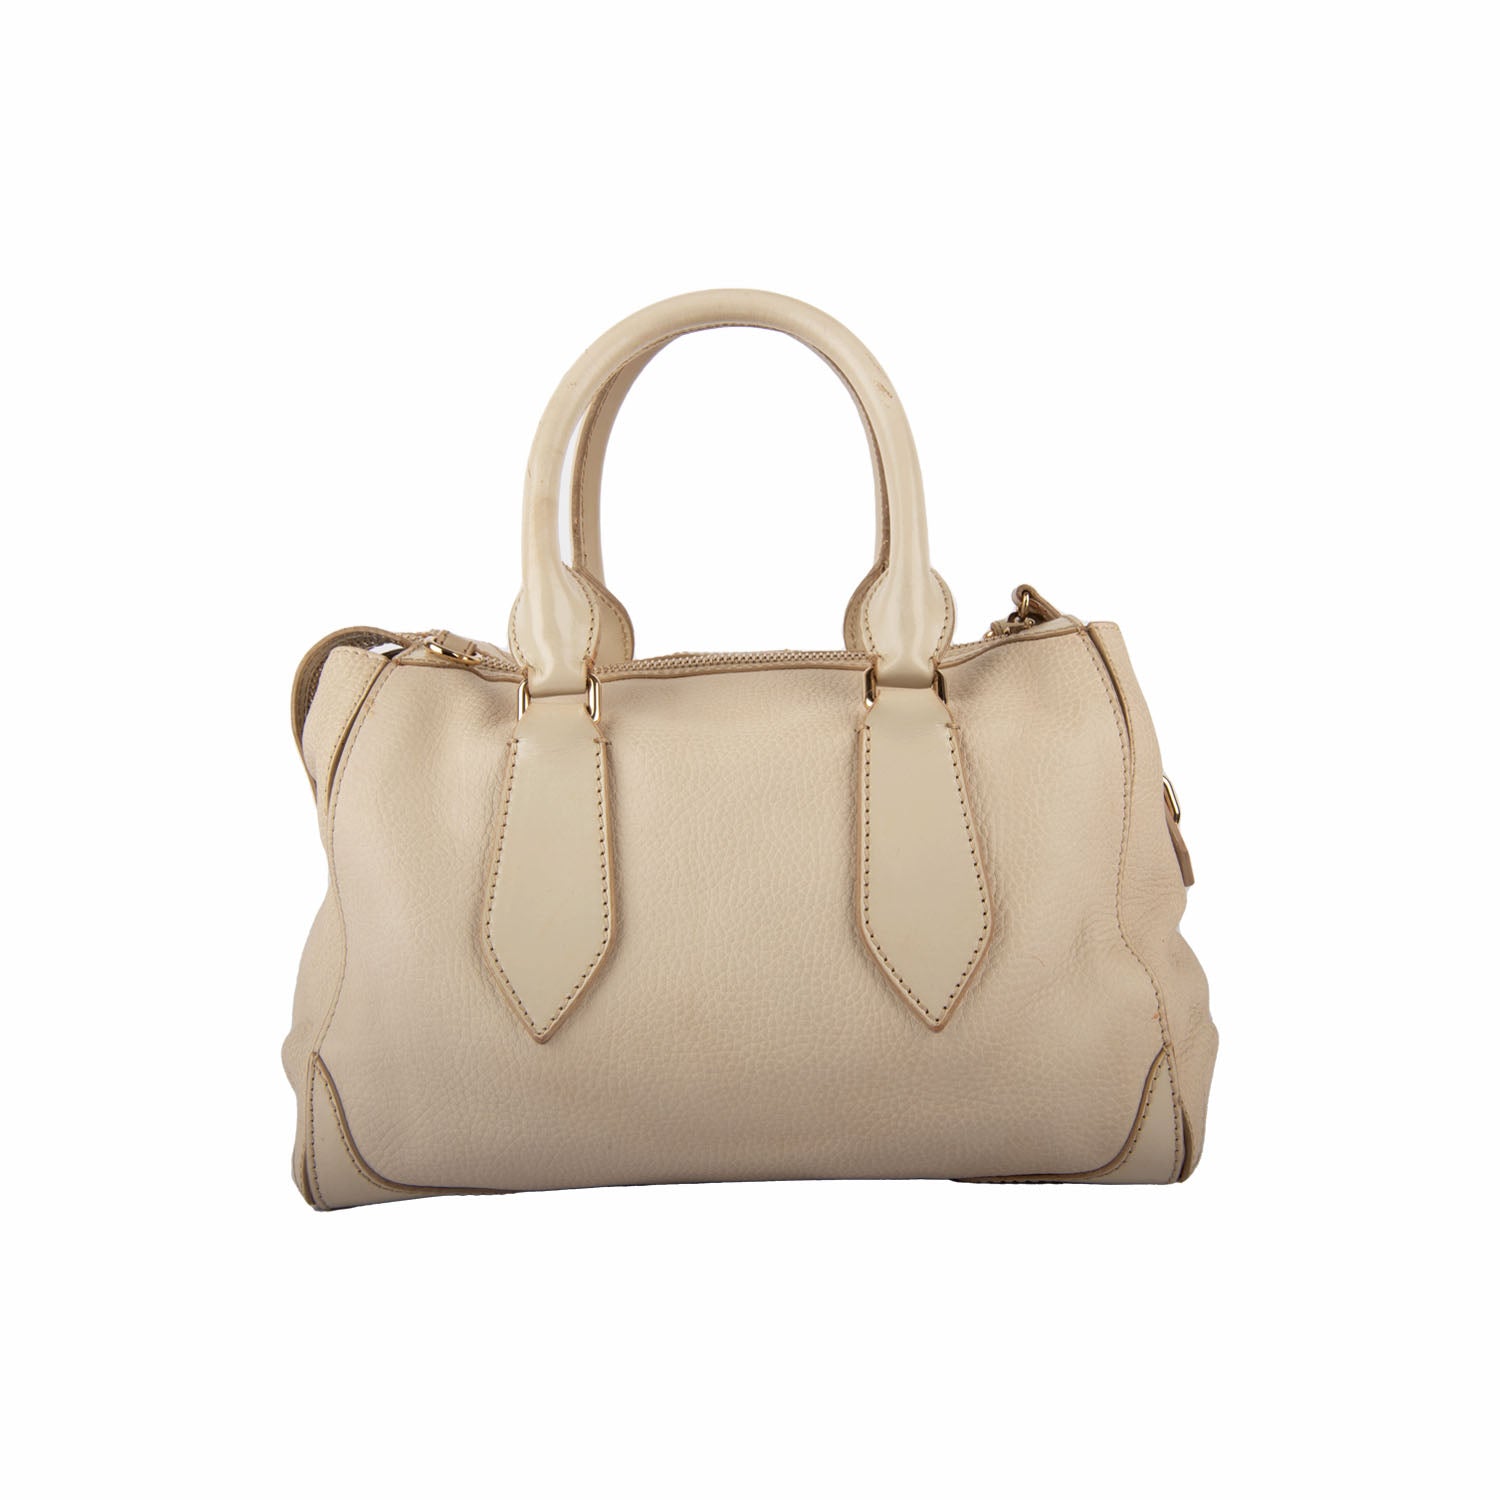 Burberry White Pebbled Leather Satchel Bag